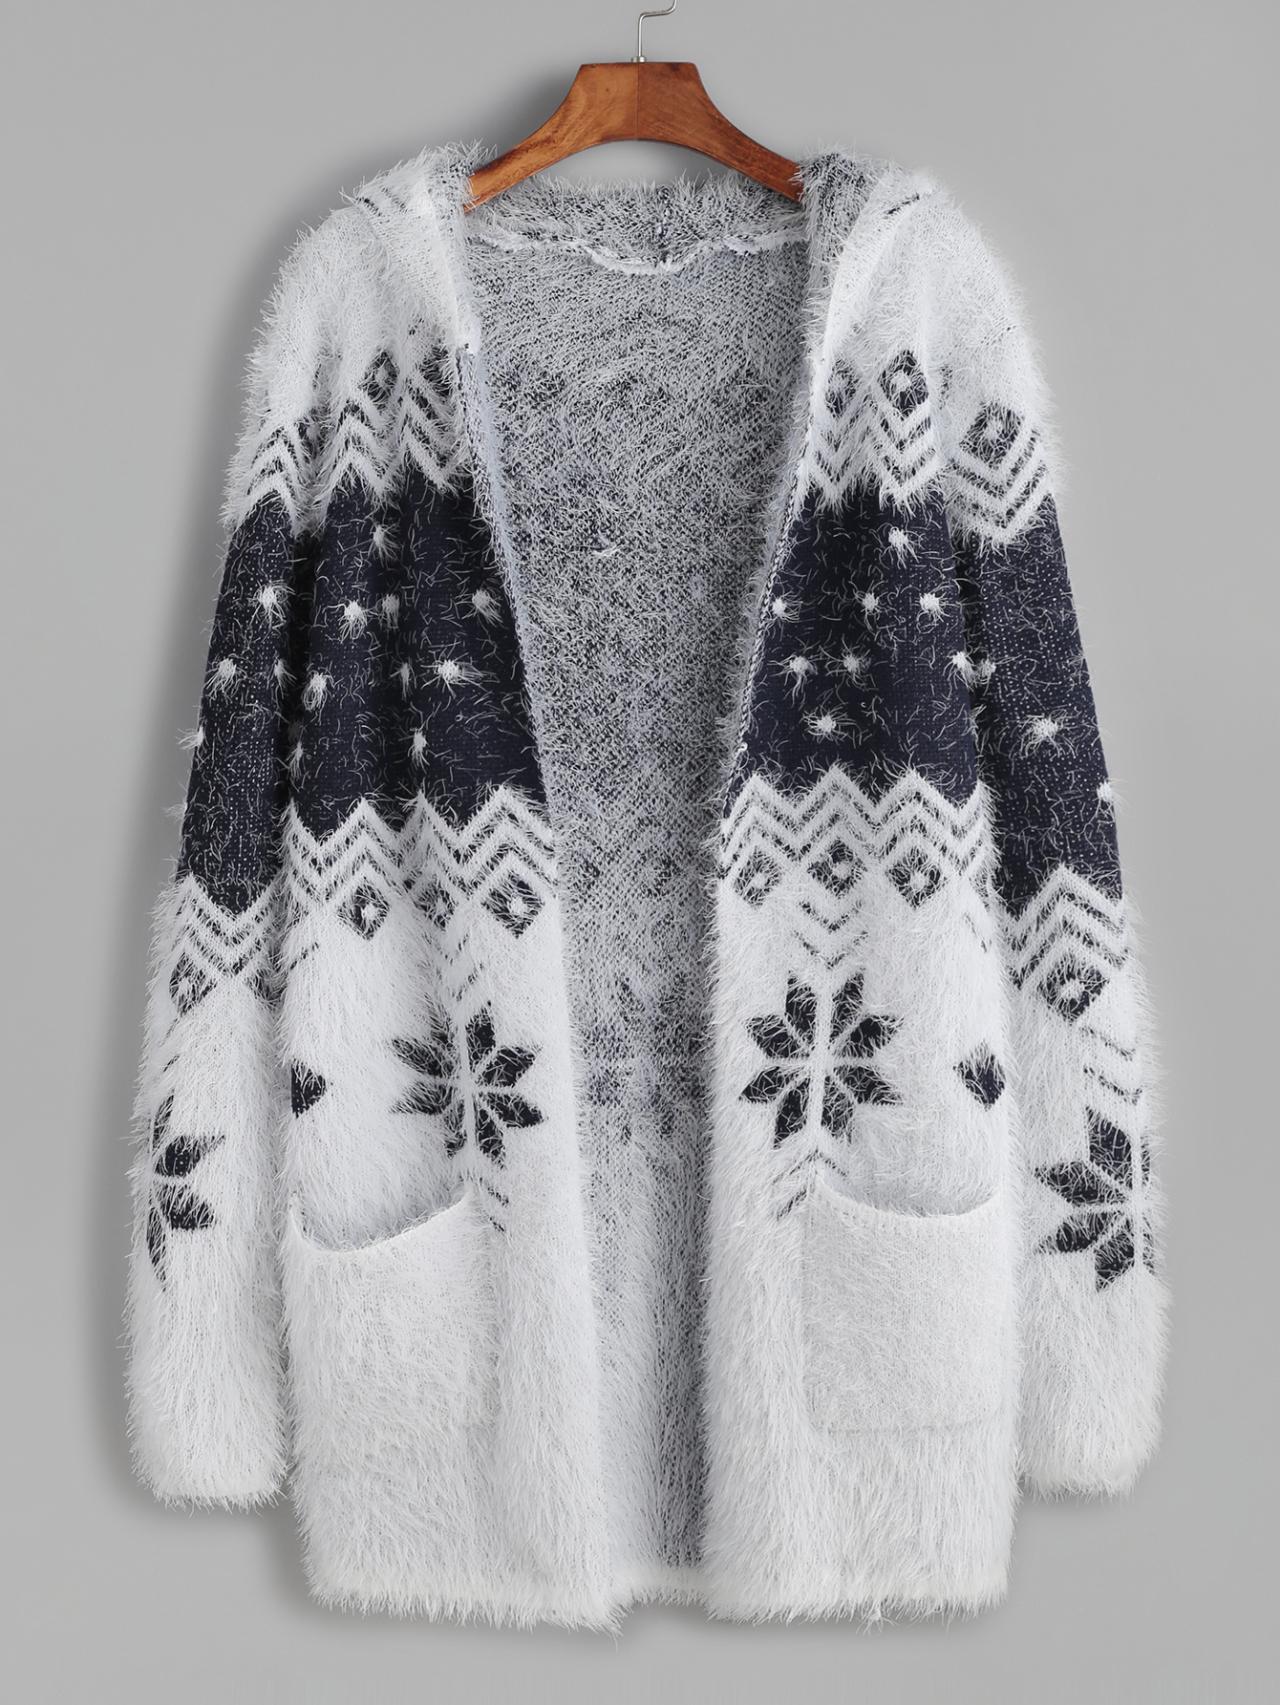 Color Block Snowflake Pattern Fuzzy Hooded Sweater Coat Cardigan